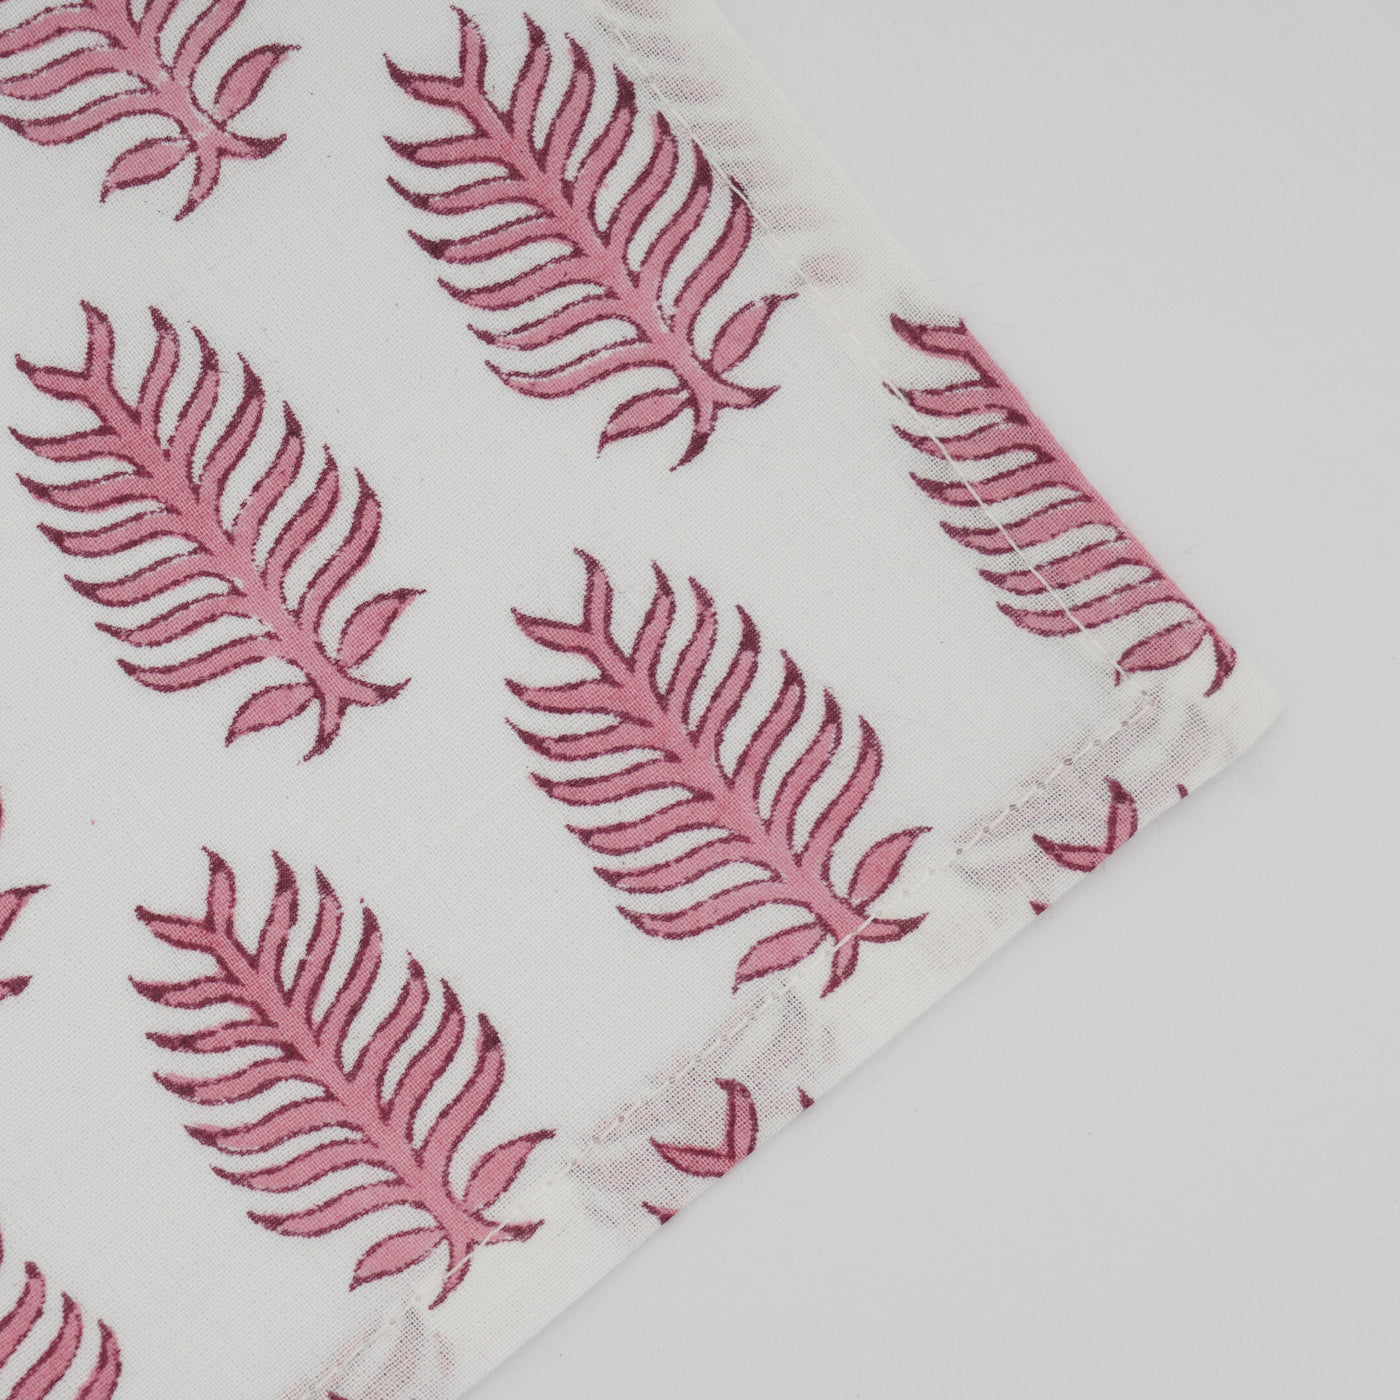 Fabricrush Taffy Pink and White Indian Hand Block Leaf Printed Pure Cotton Cloth Biodegradable Napkins, 18x18"- Cocktail Napkins, 20x20"- Dinner Napkins